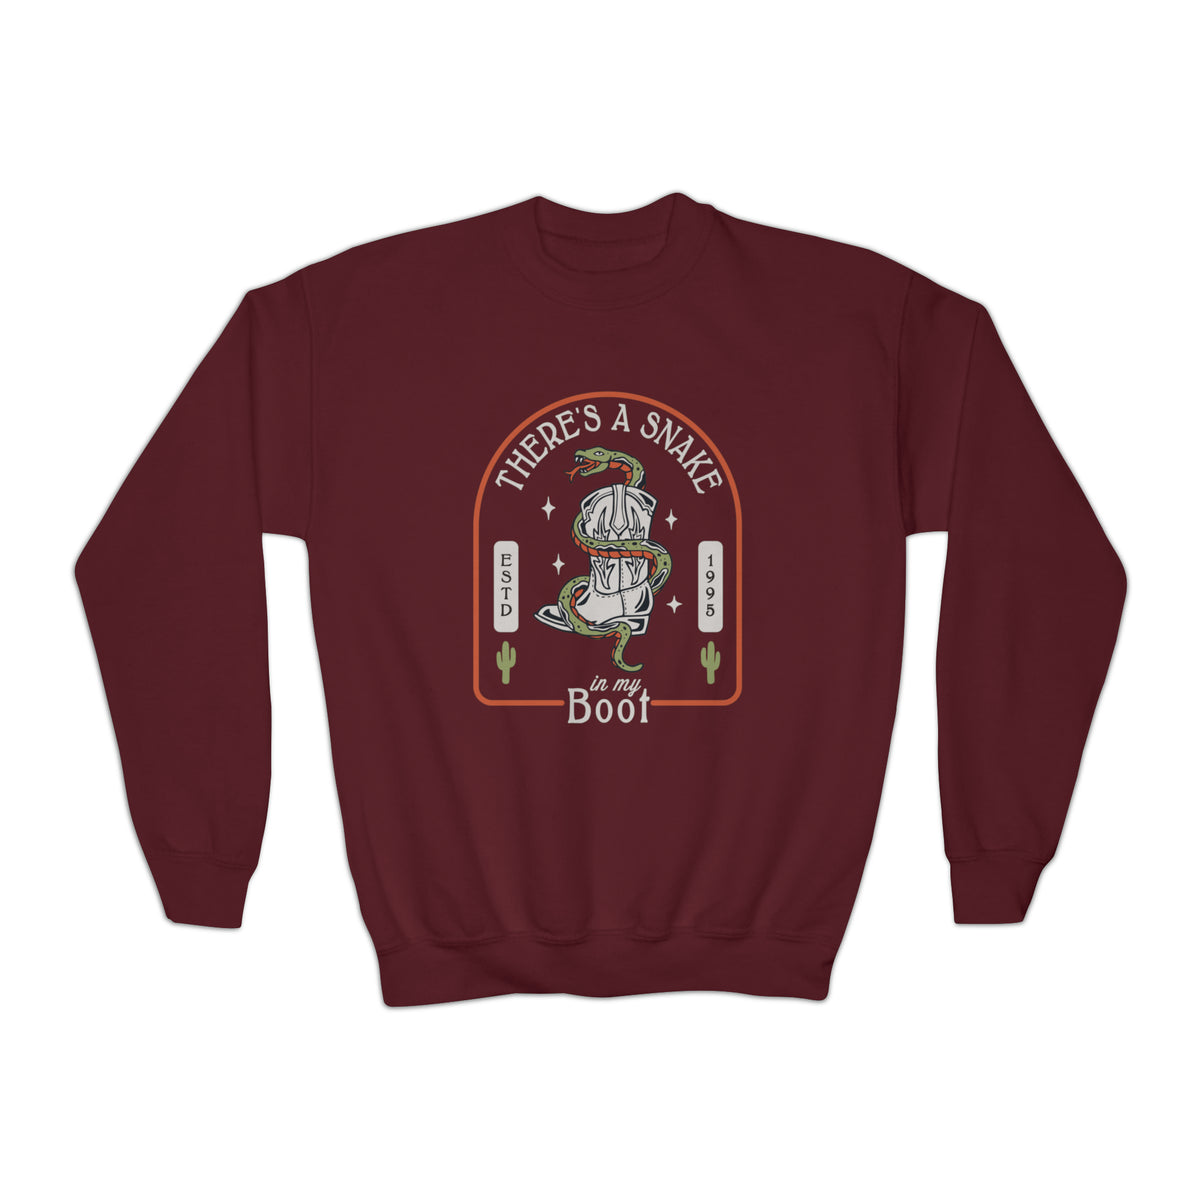 There's A Snake In My Boot Gildan Youth Crewneck Sweatshirt